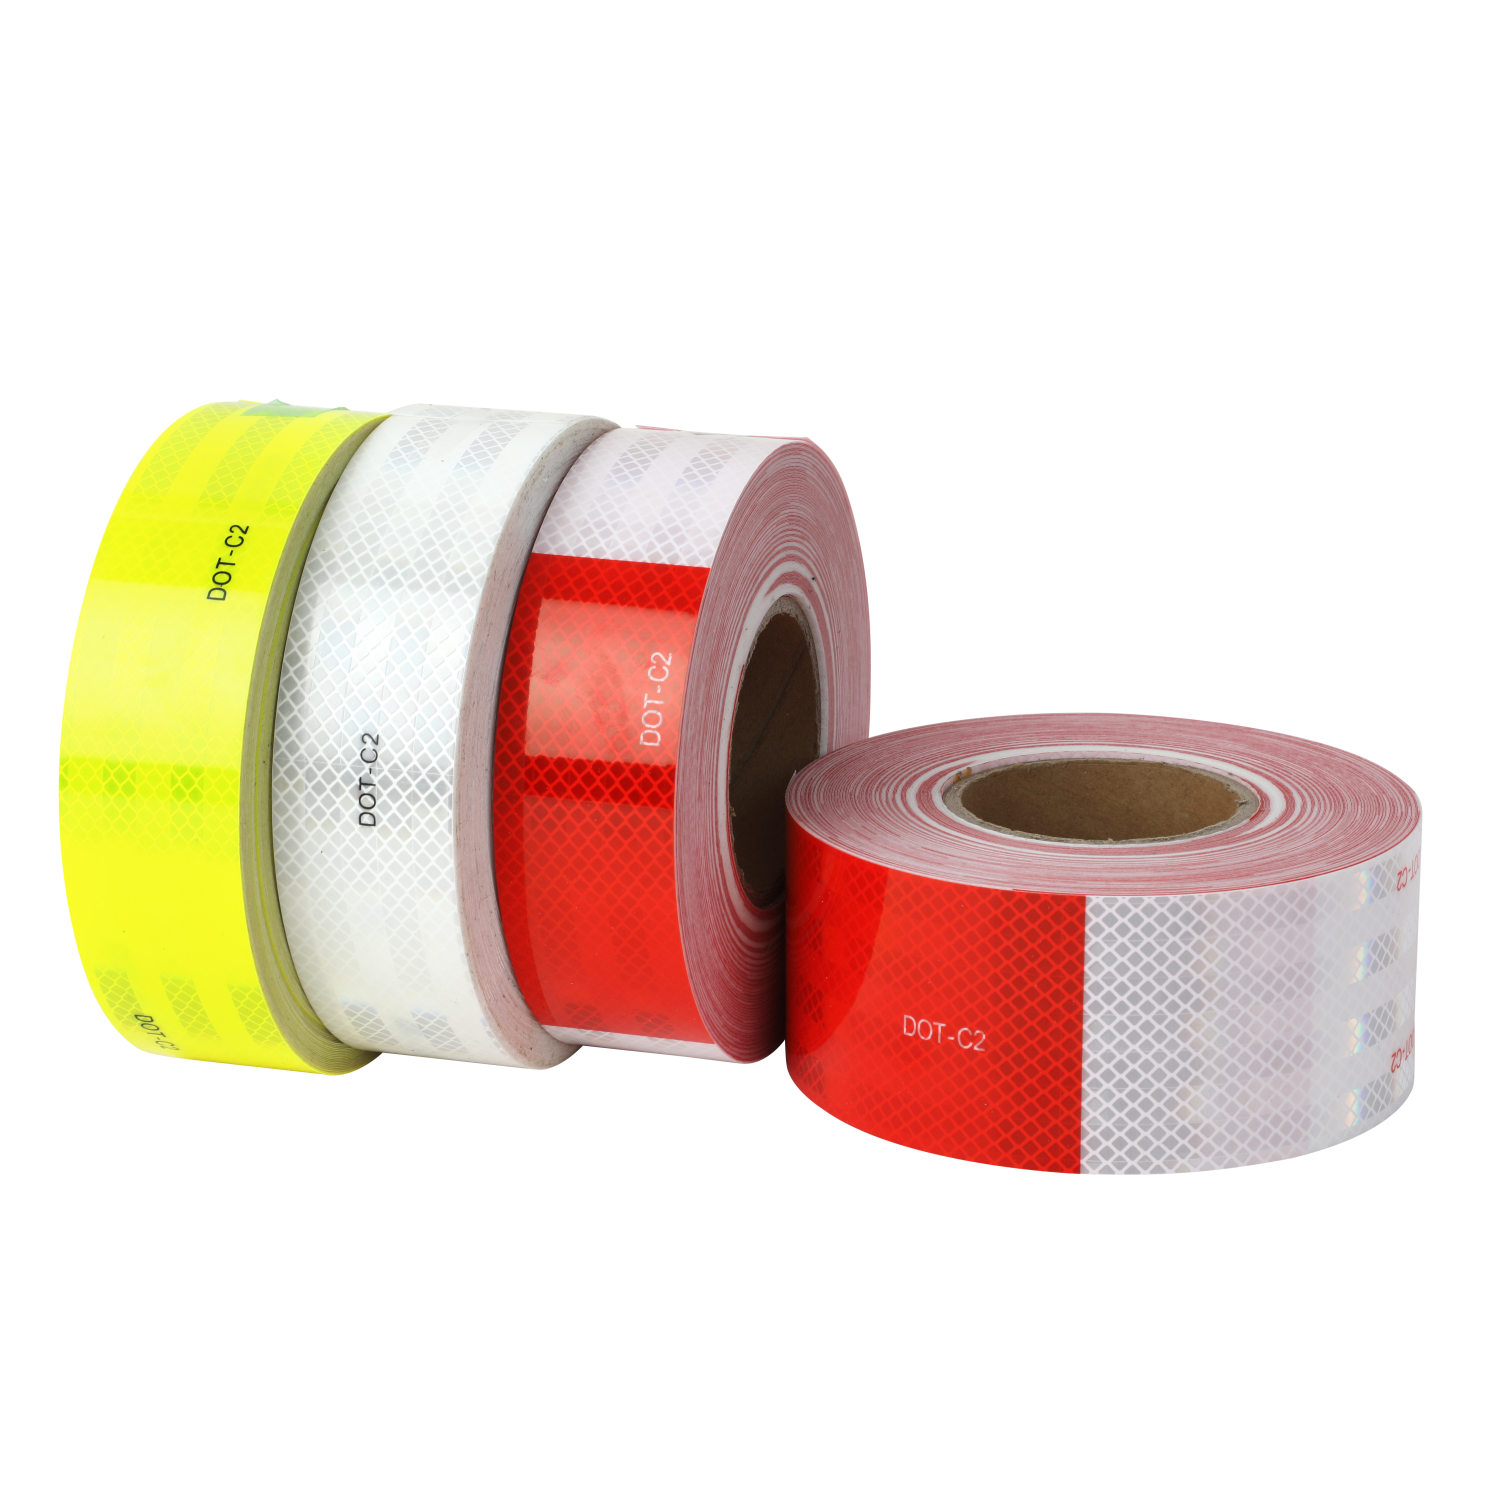 High Visibility PC/Acrylic Red White DOT-C2 Reflective Safety Conspicuity Tape